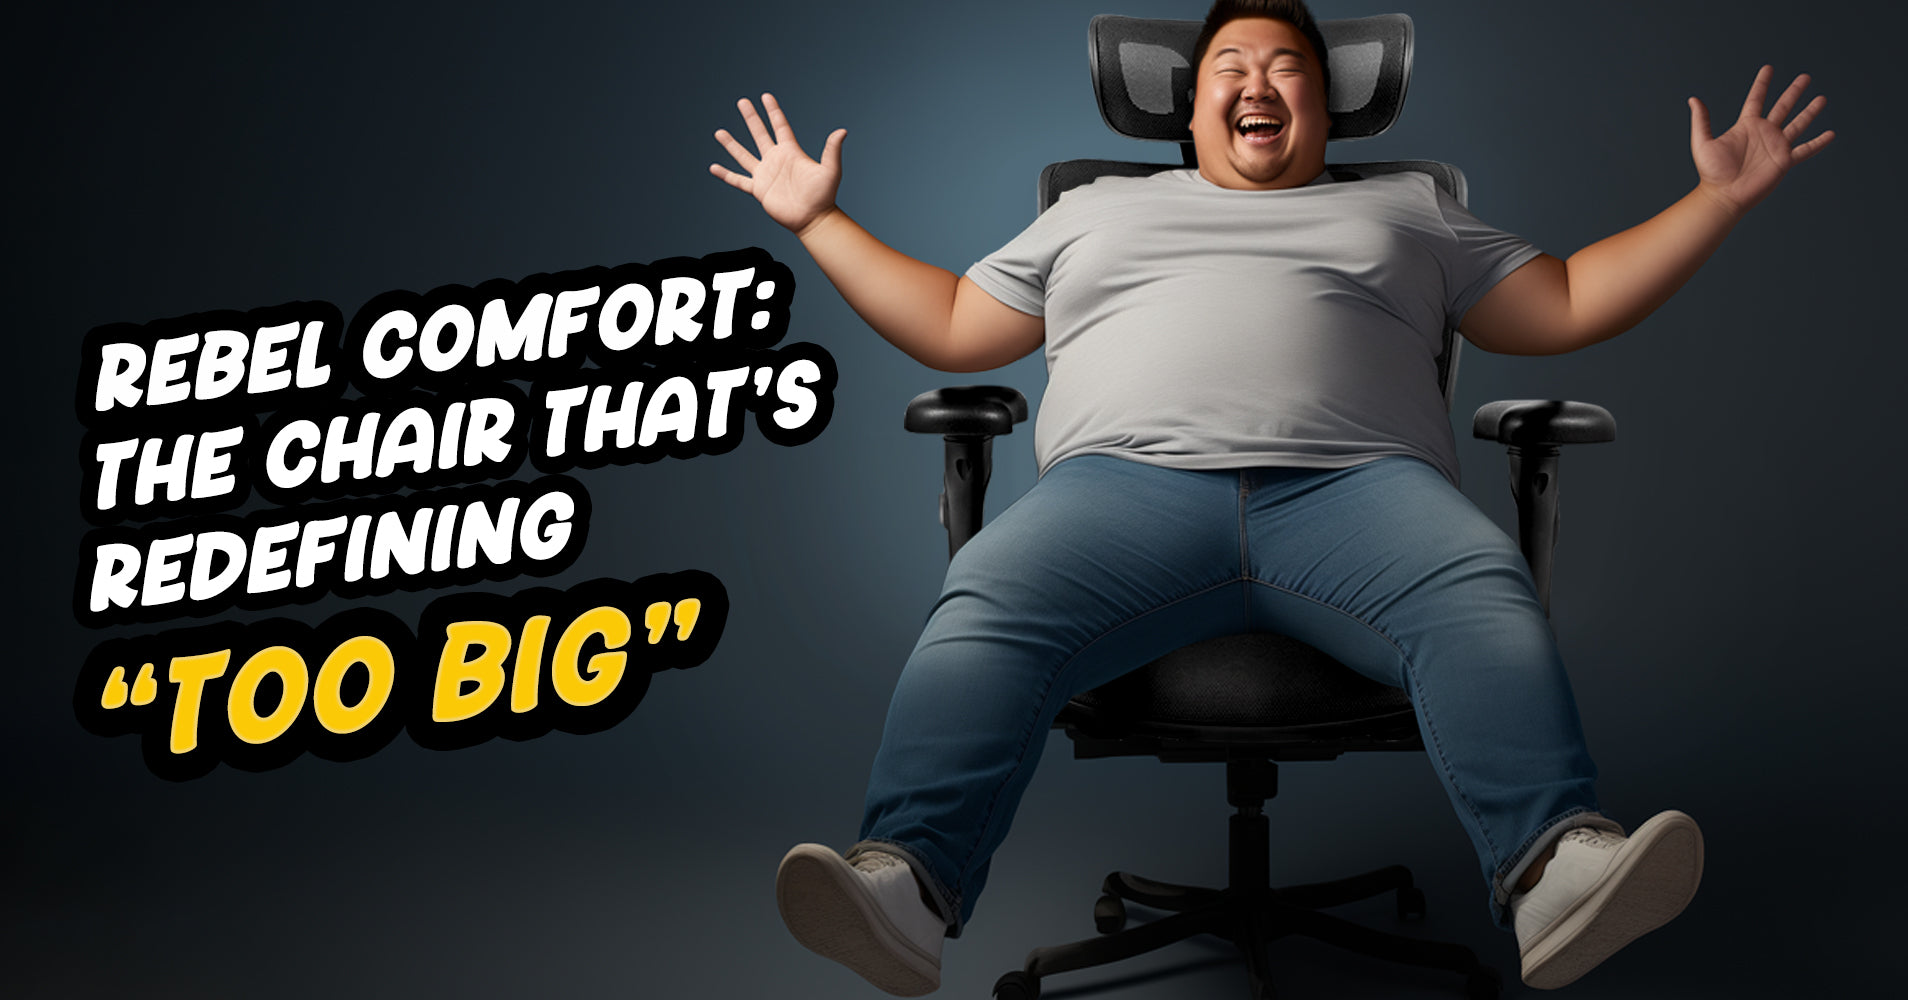 A cheerful man with a larger build joyfully sits on a spacious office chair, arms outstretched, appearing very comfortable. The image includes text that reads 'REBEL COMFORT: THE CHAIR THAT'S REDEFINING "TOO BIG".